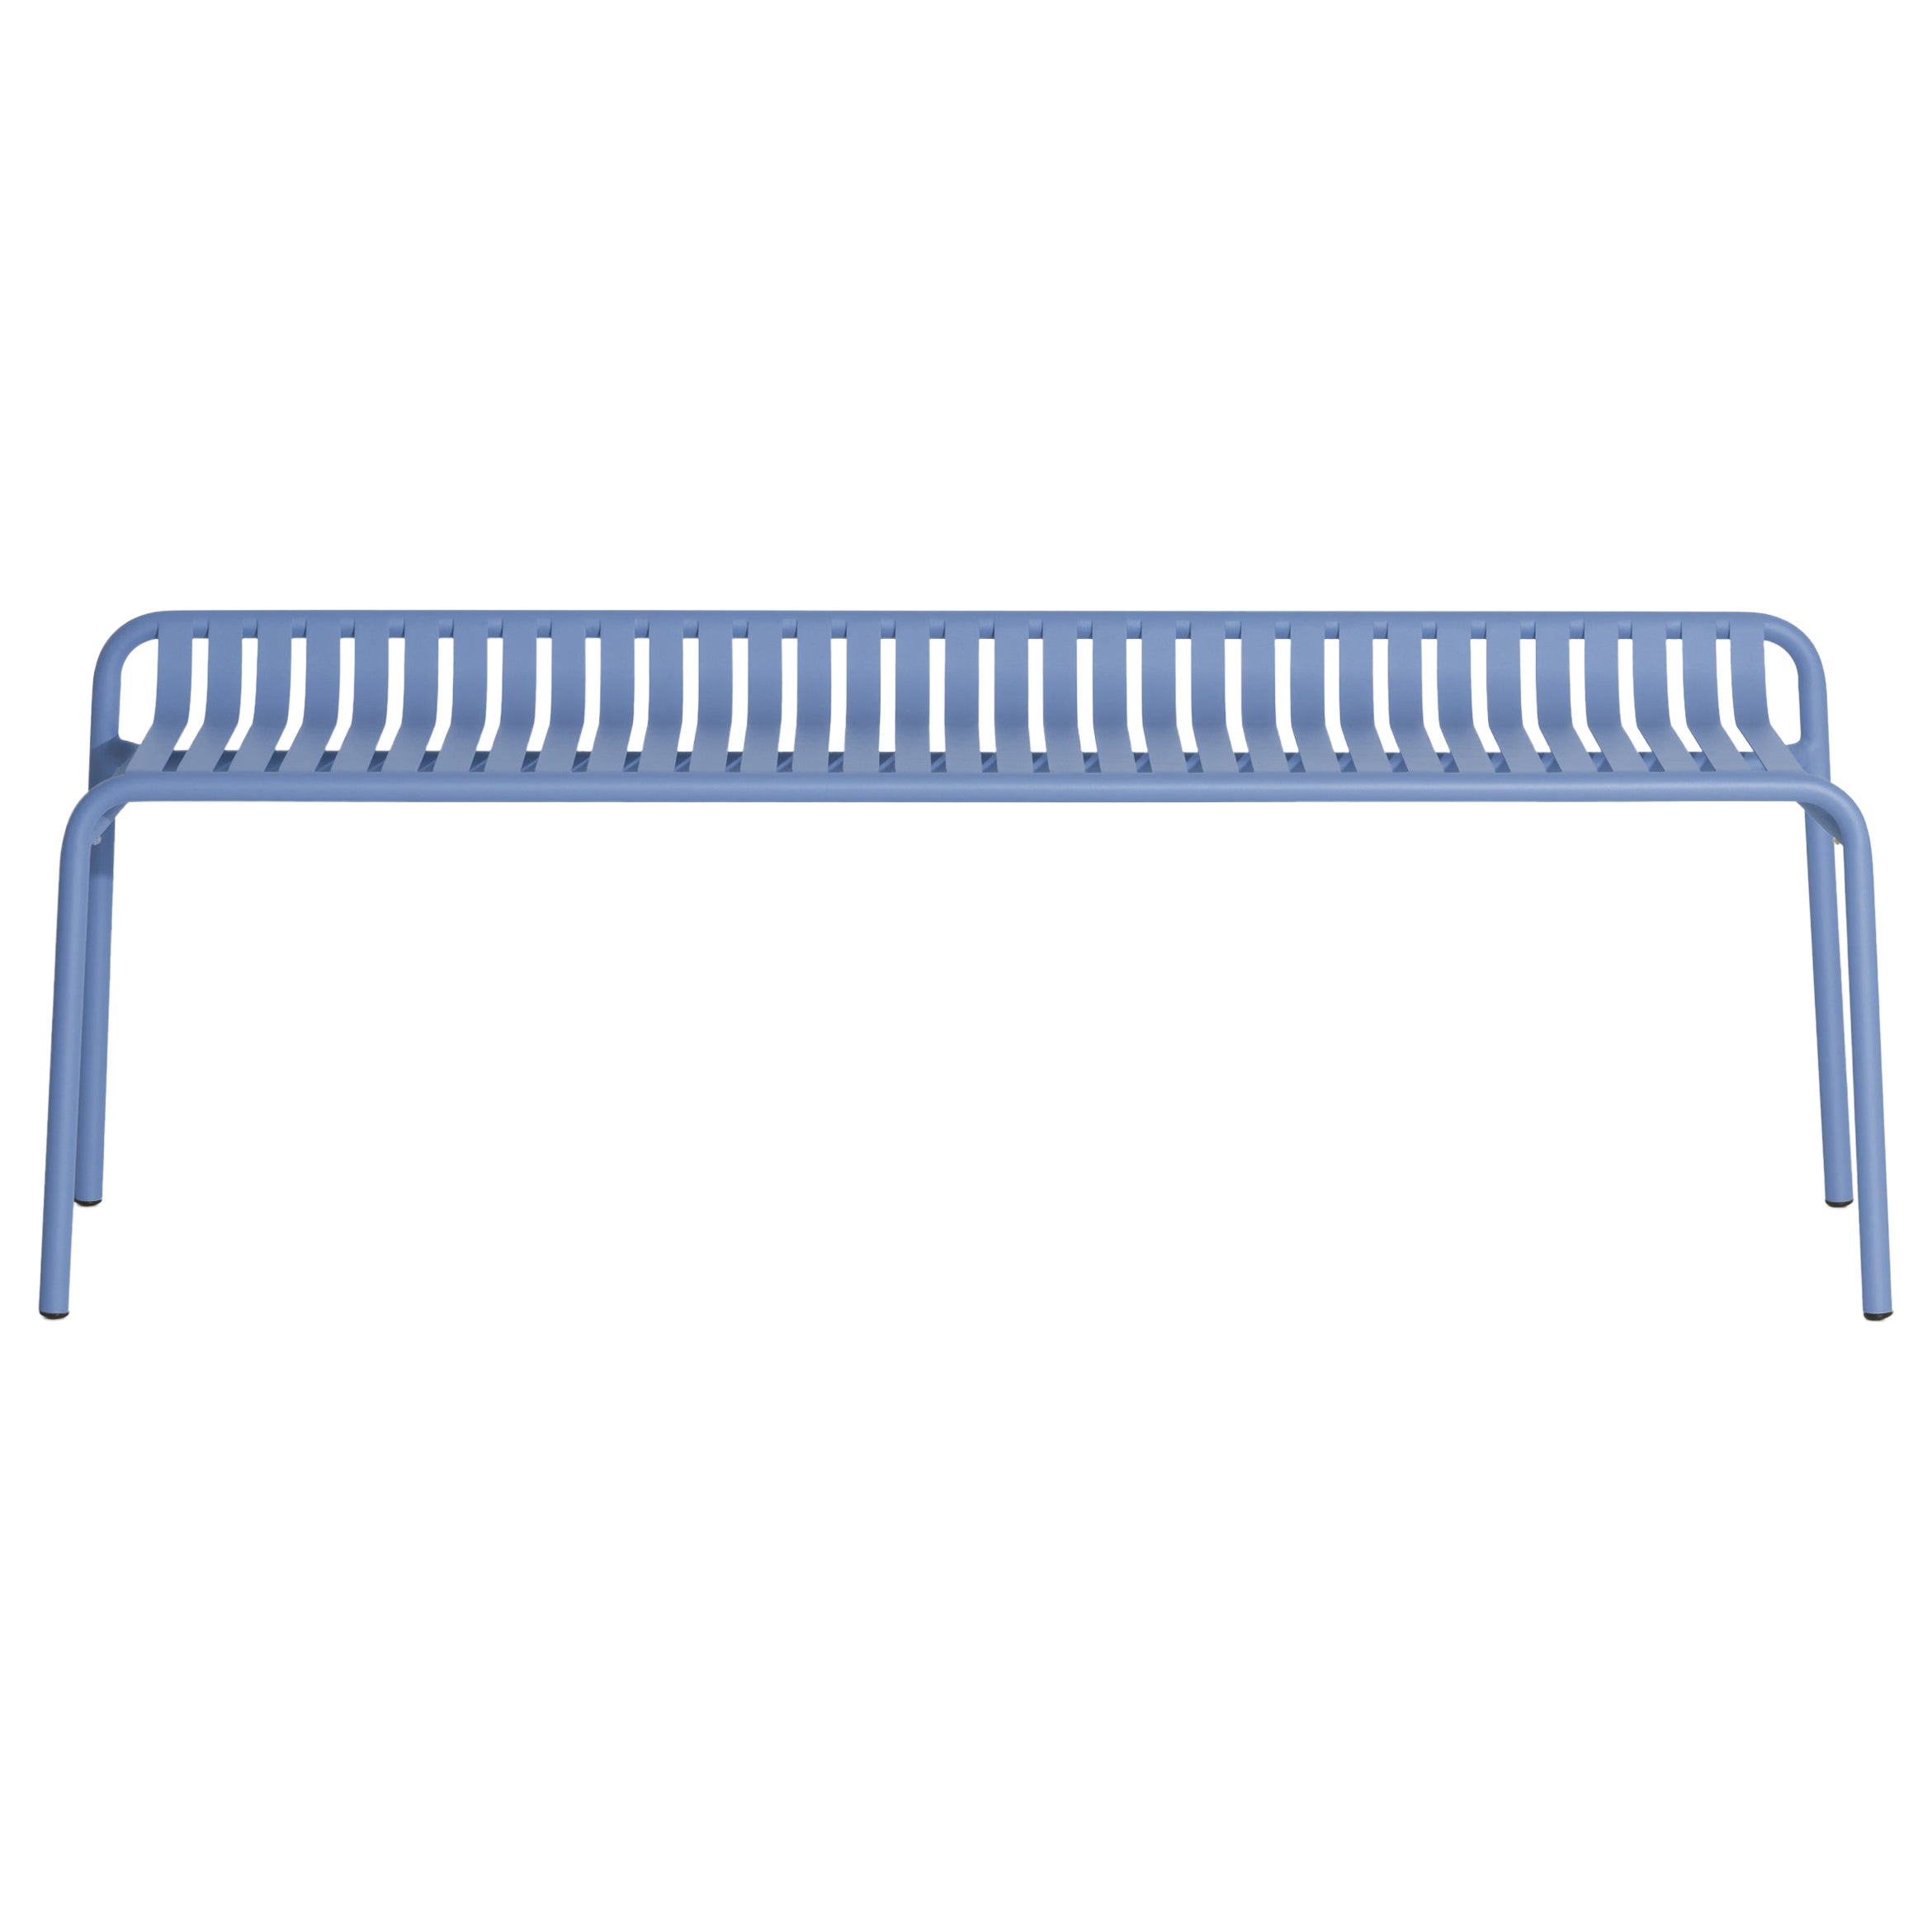 Petite Friture Week-End Bench without Back in Azur Blue Aluminium, 2017  For Sale